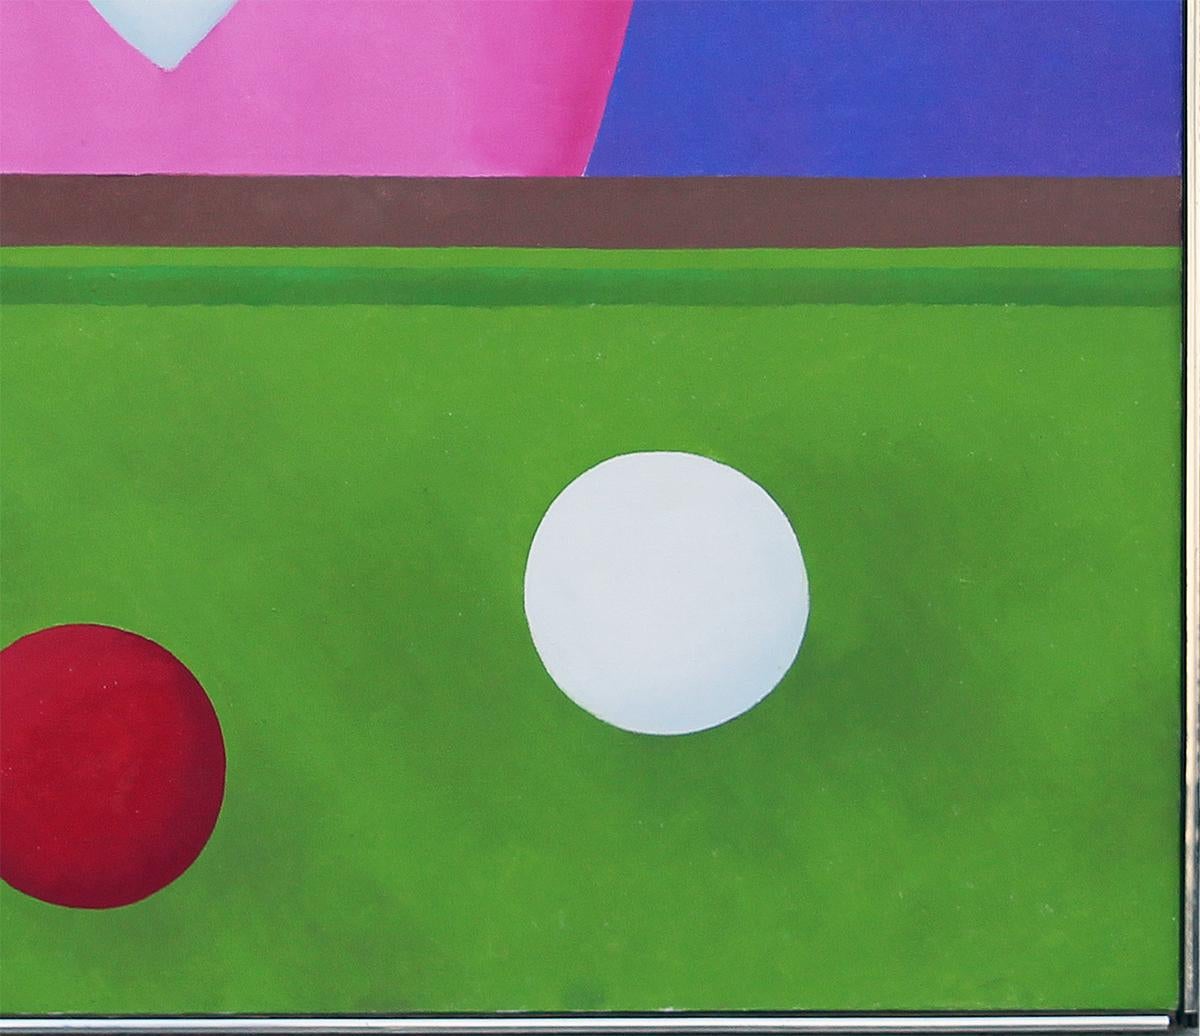 Colorful modern figurative portrait of a man playing billiards or pool by Connecticut artist Gerald Garston. The work features a man in a blue bowler hat and pink suit reading his cue to take his shot set against a rich purple background.